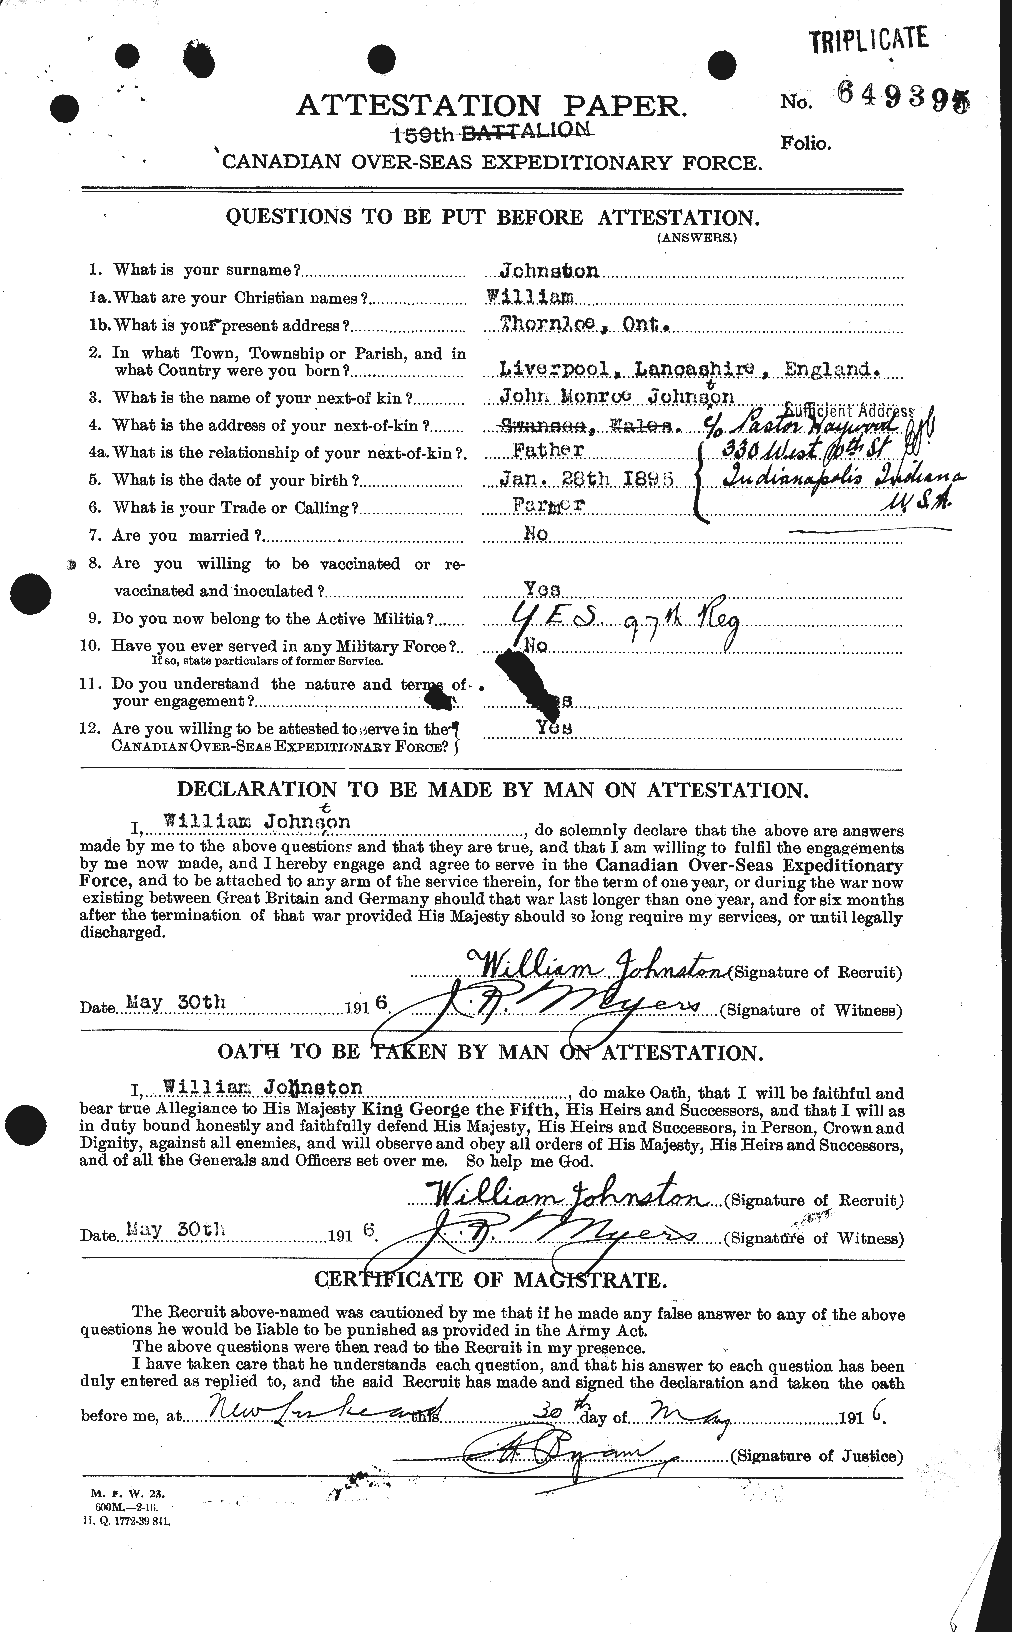 Personnel Records of the First World War - CEF 427283a